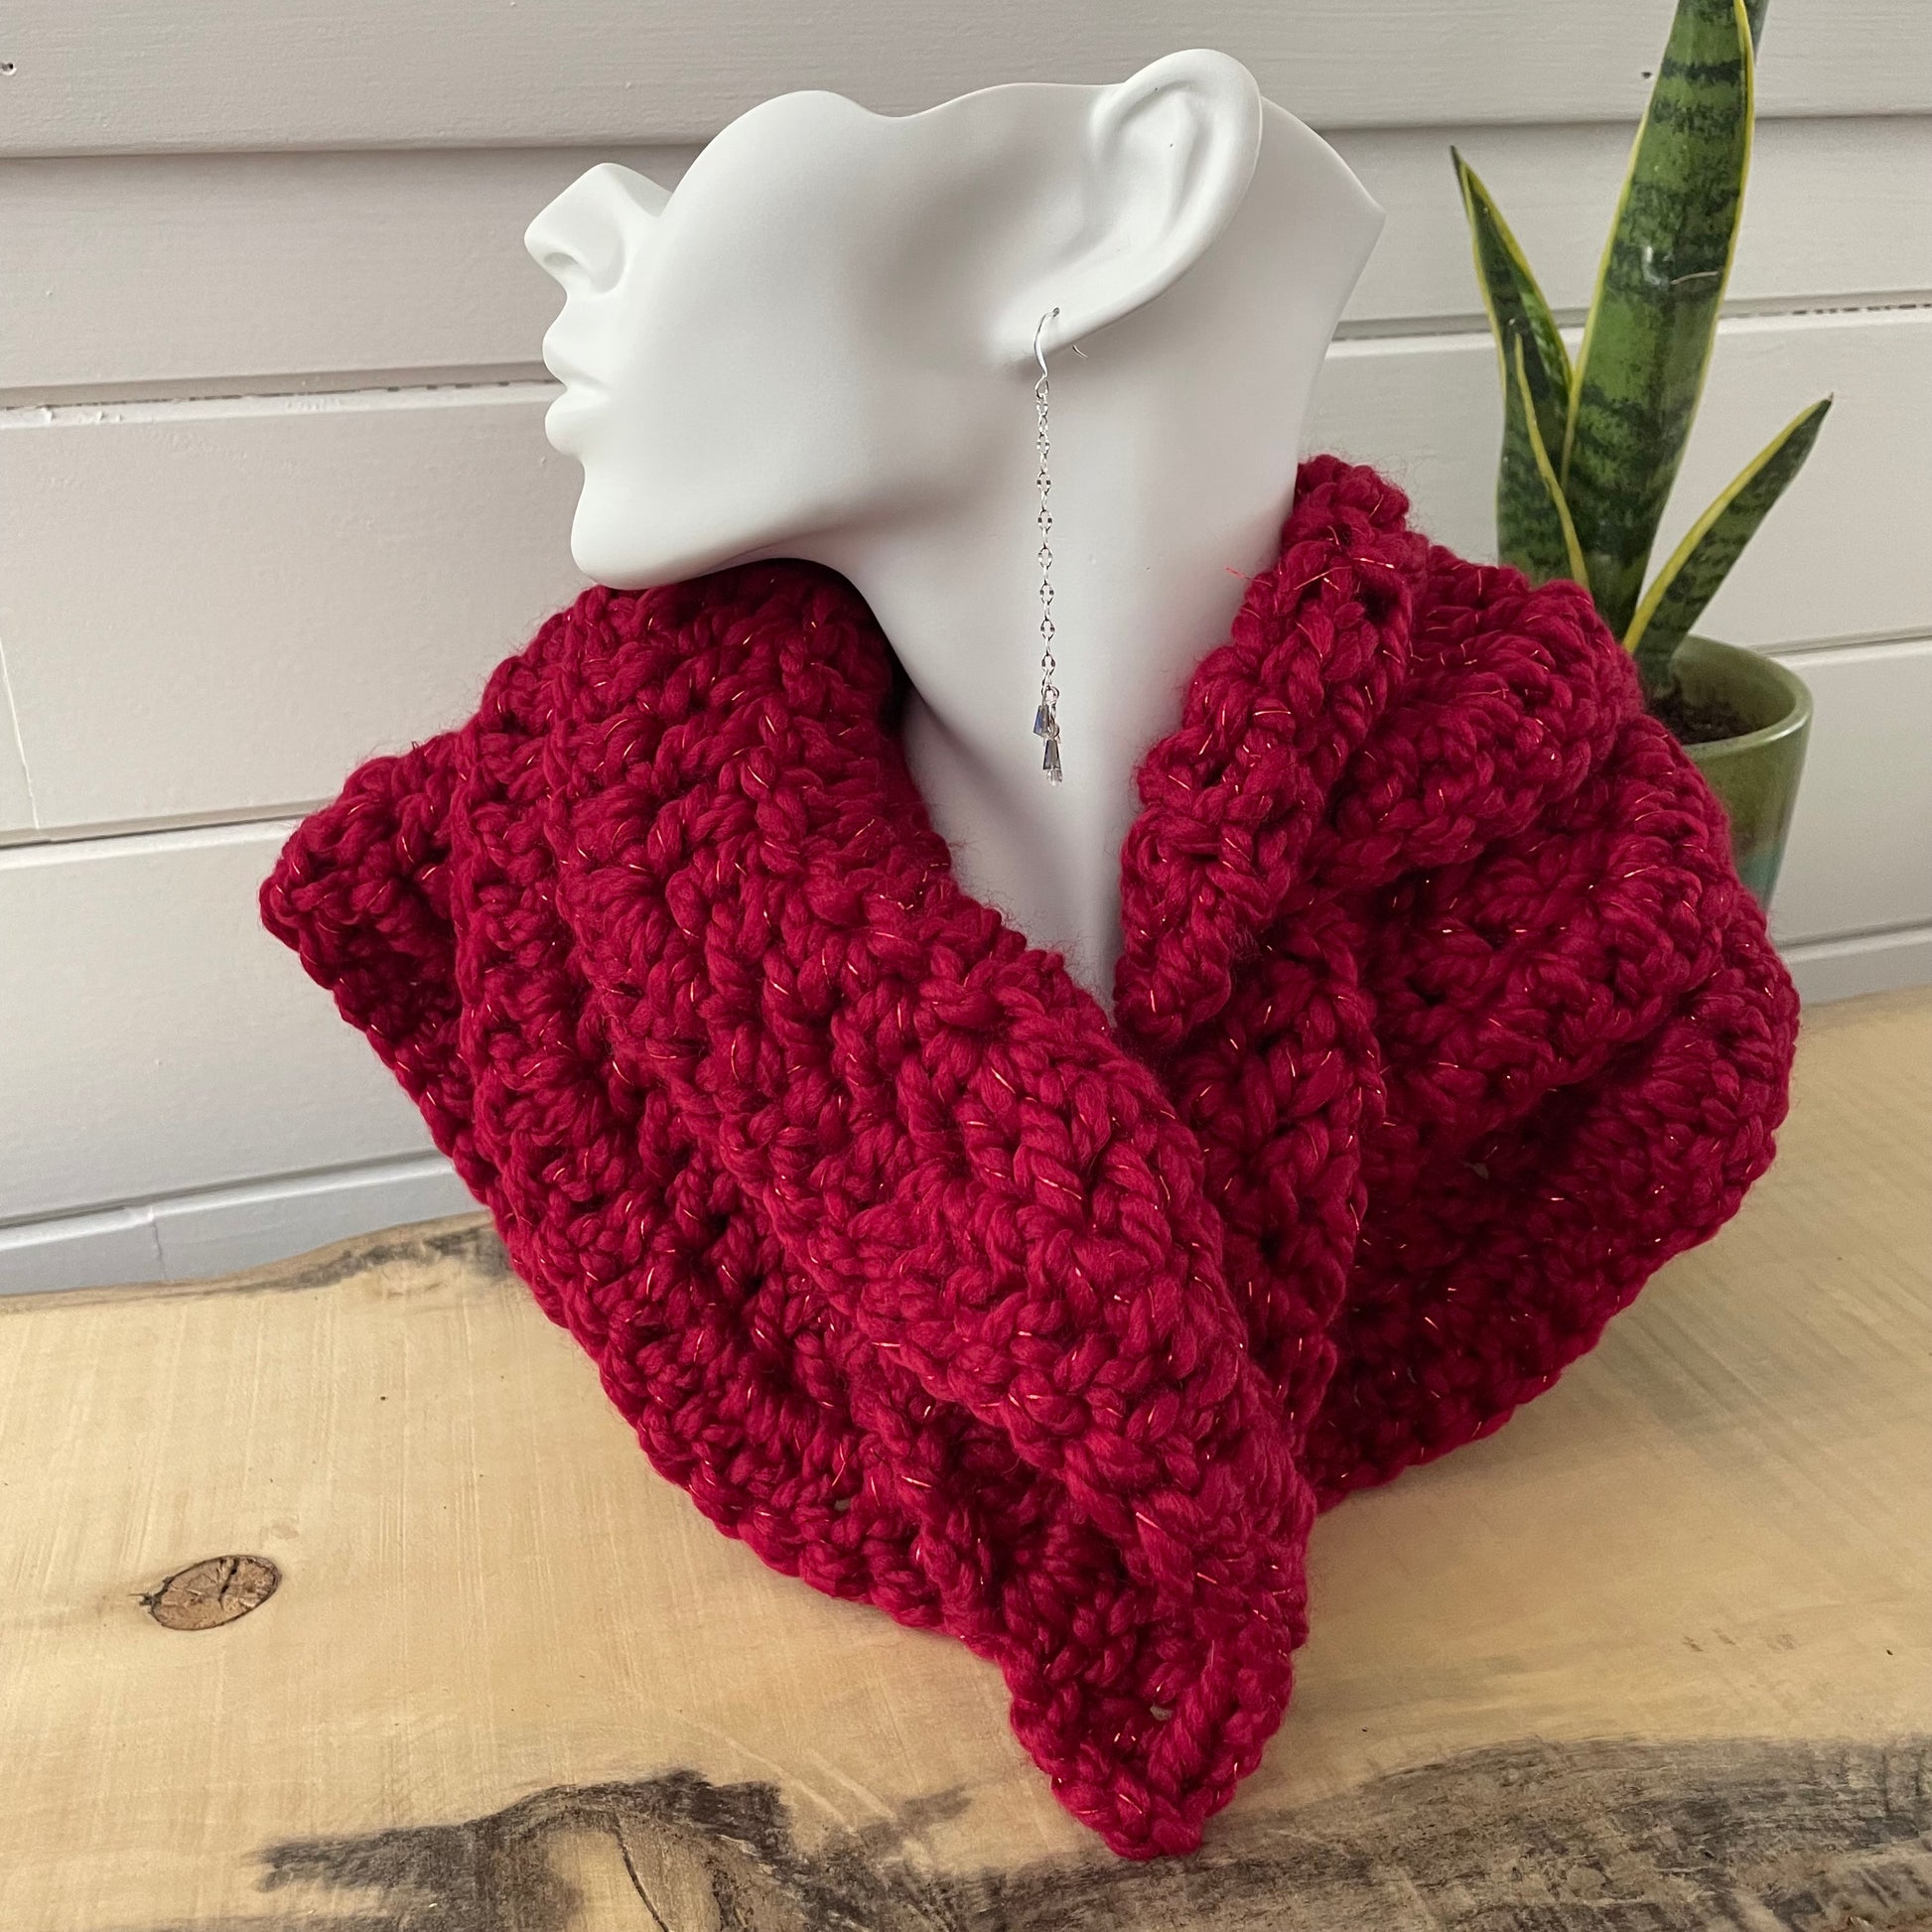 Extra Warm Crochet Knit Chunky Ruffled Scarf Hand Crafted Marbled Red Wine Maroon Metallic Accent Flirty Fall Winter--displayed on solid white bust